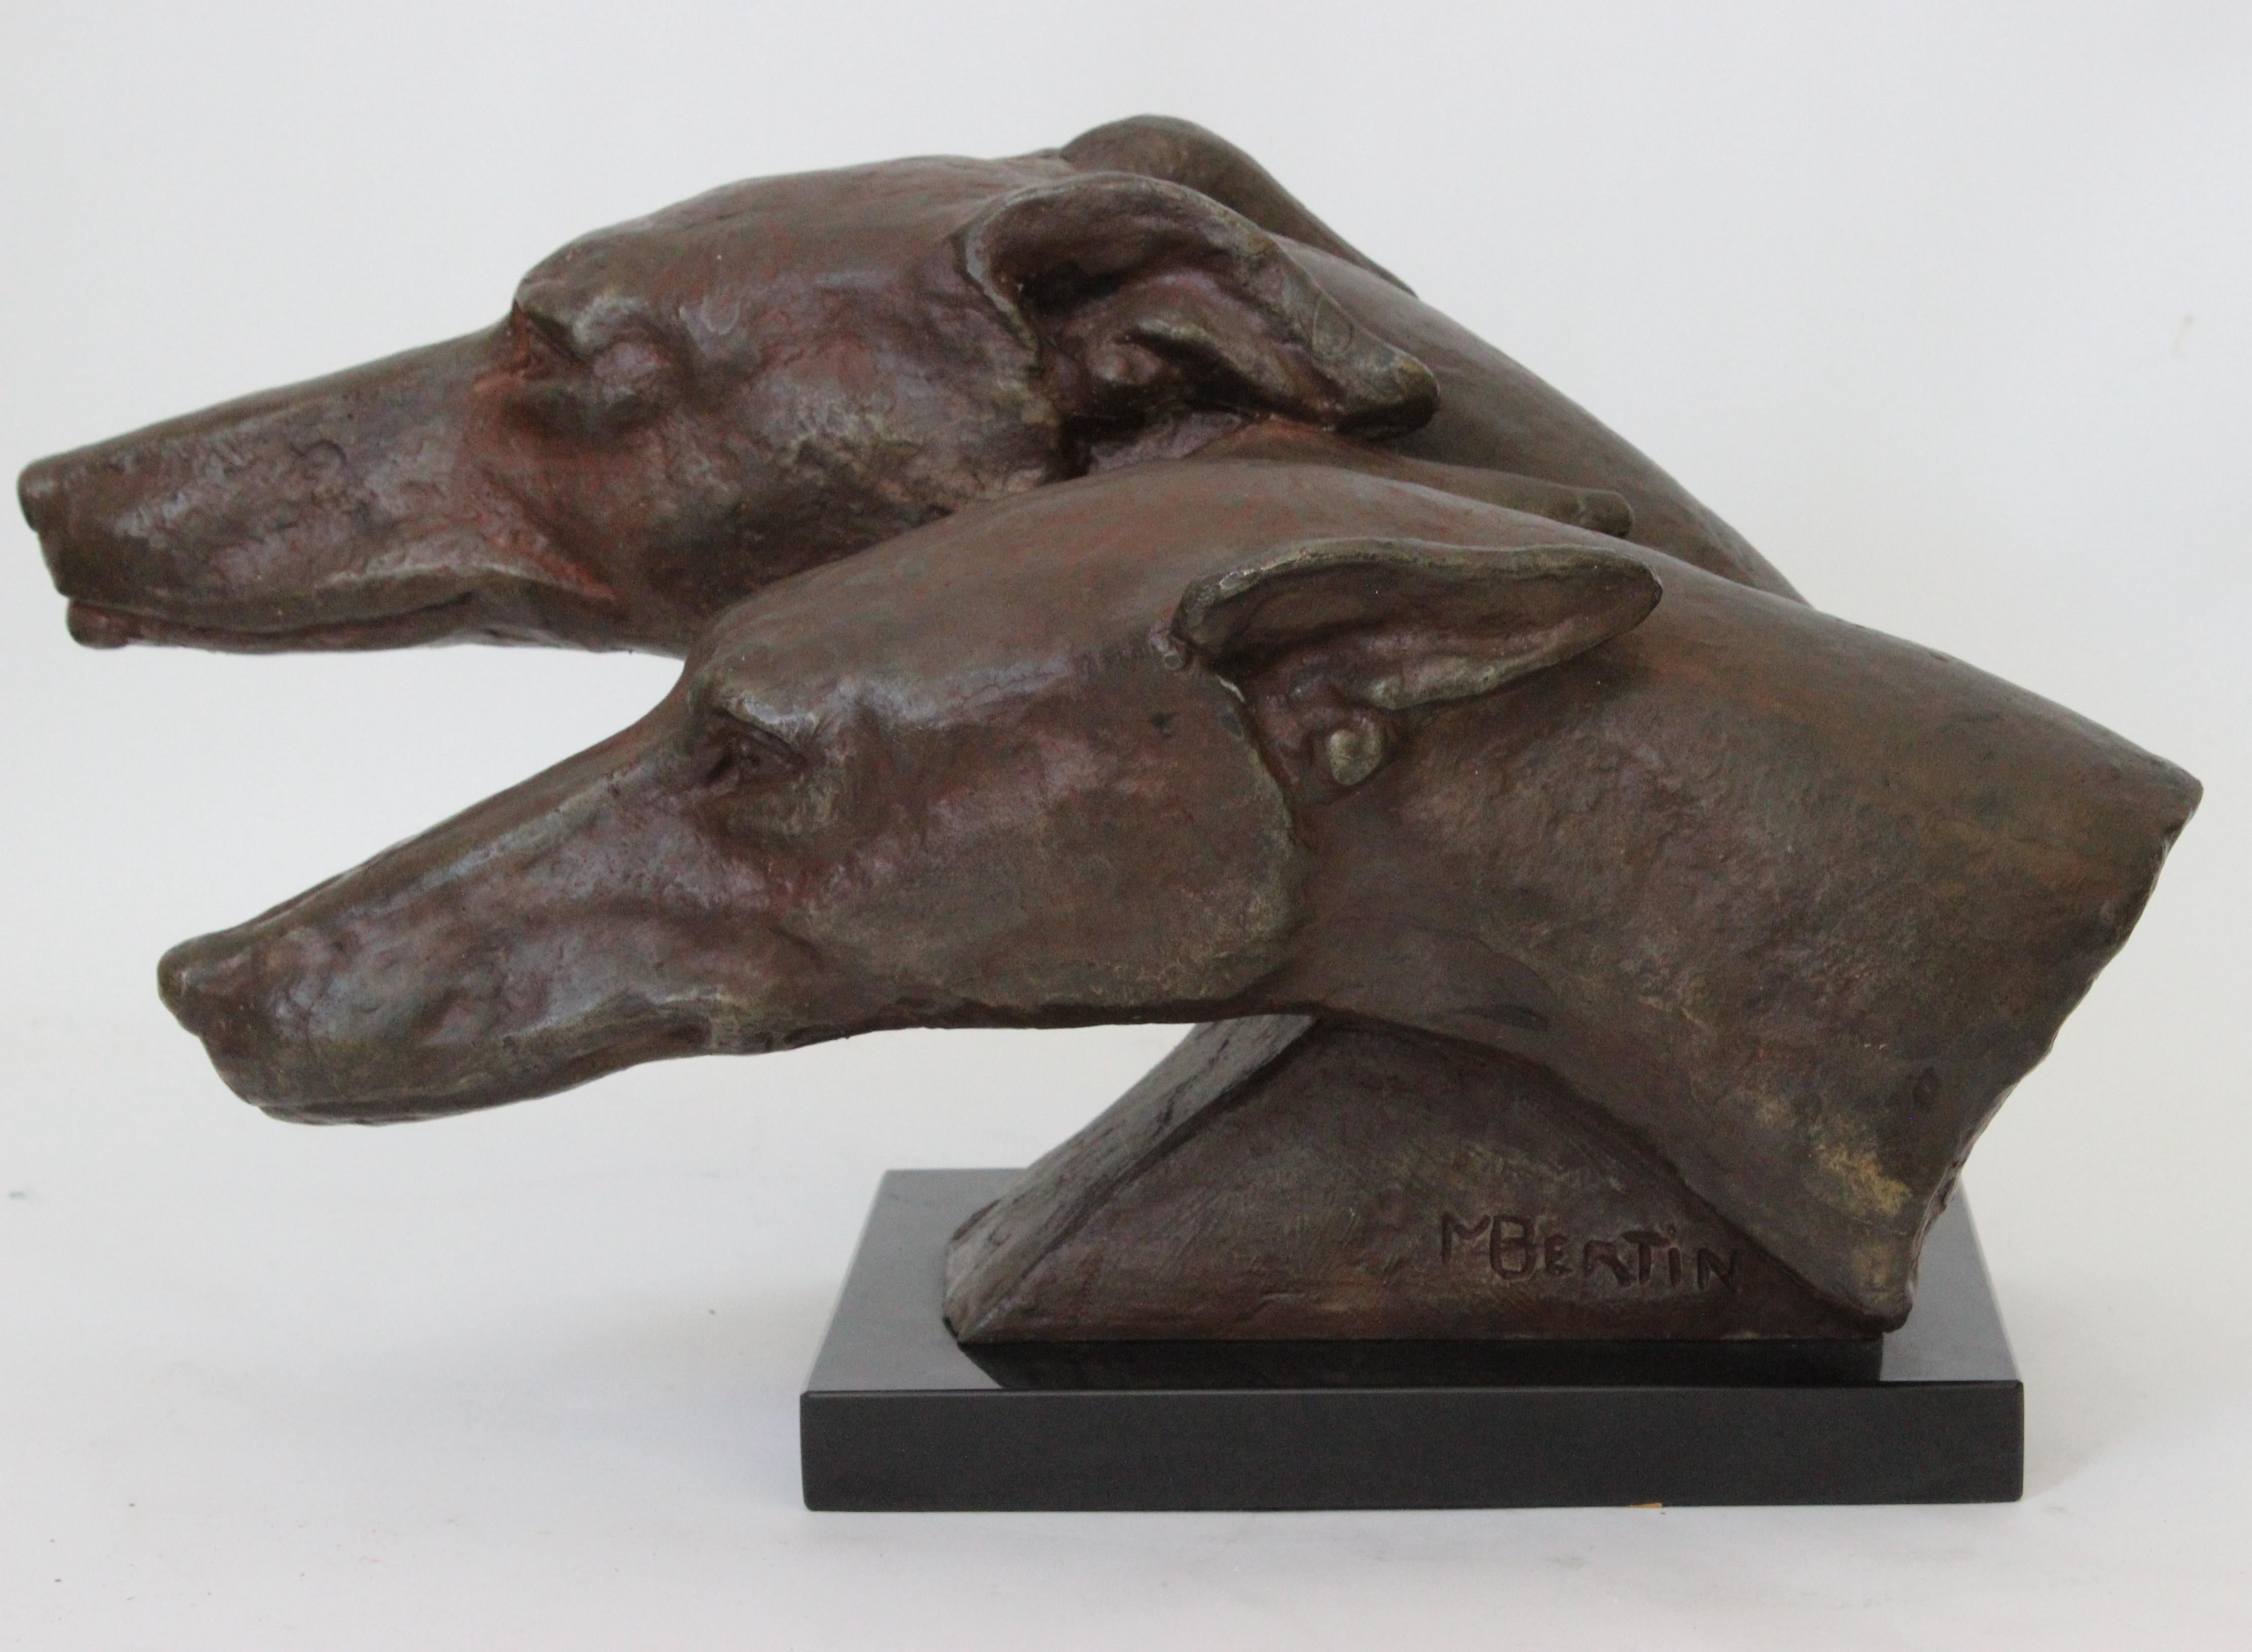 This stylish and dramatic bronze patinated metal sculpture of two grey hounds dates to the 20th century and is titled 